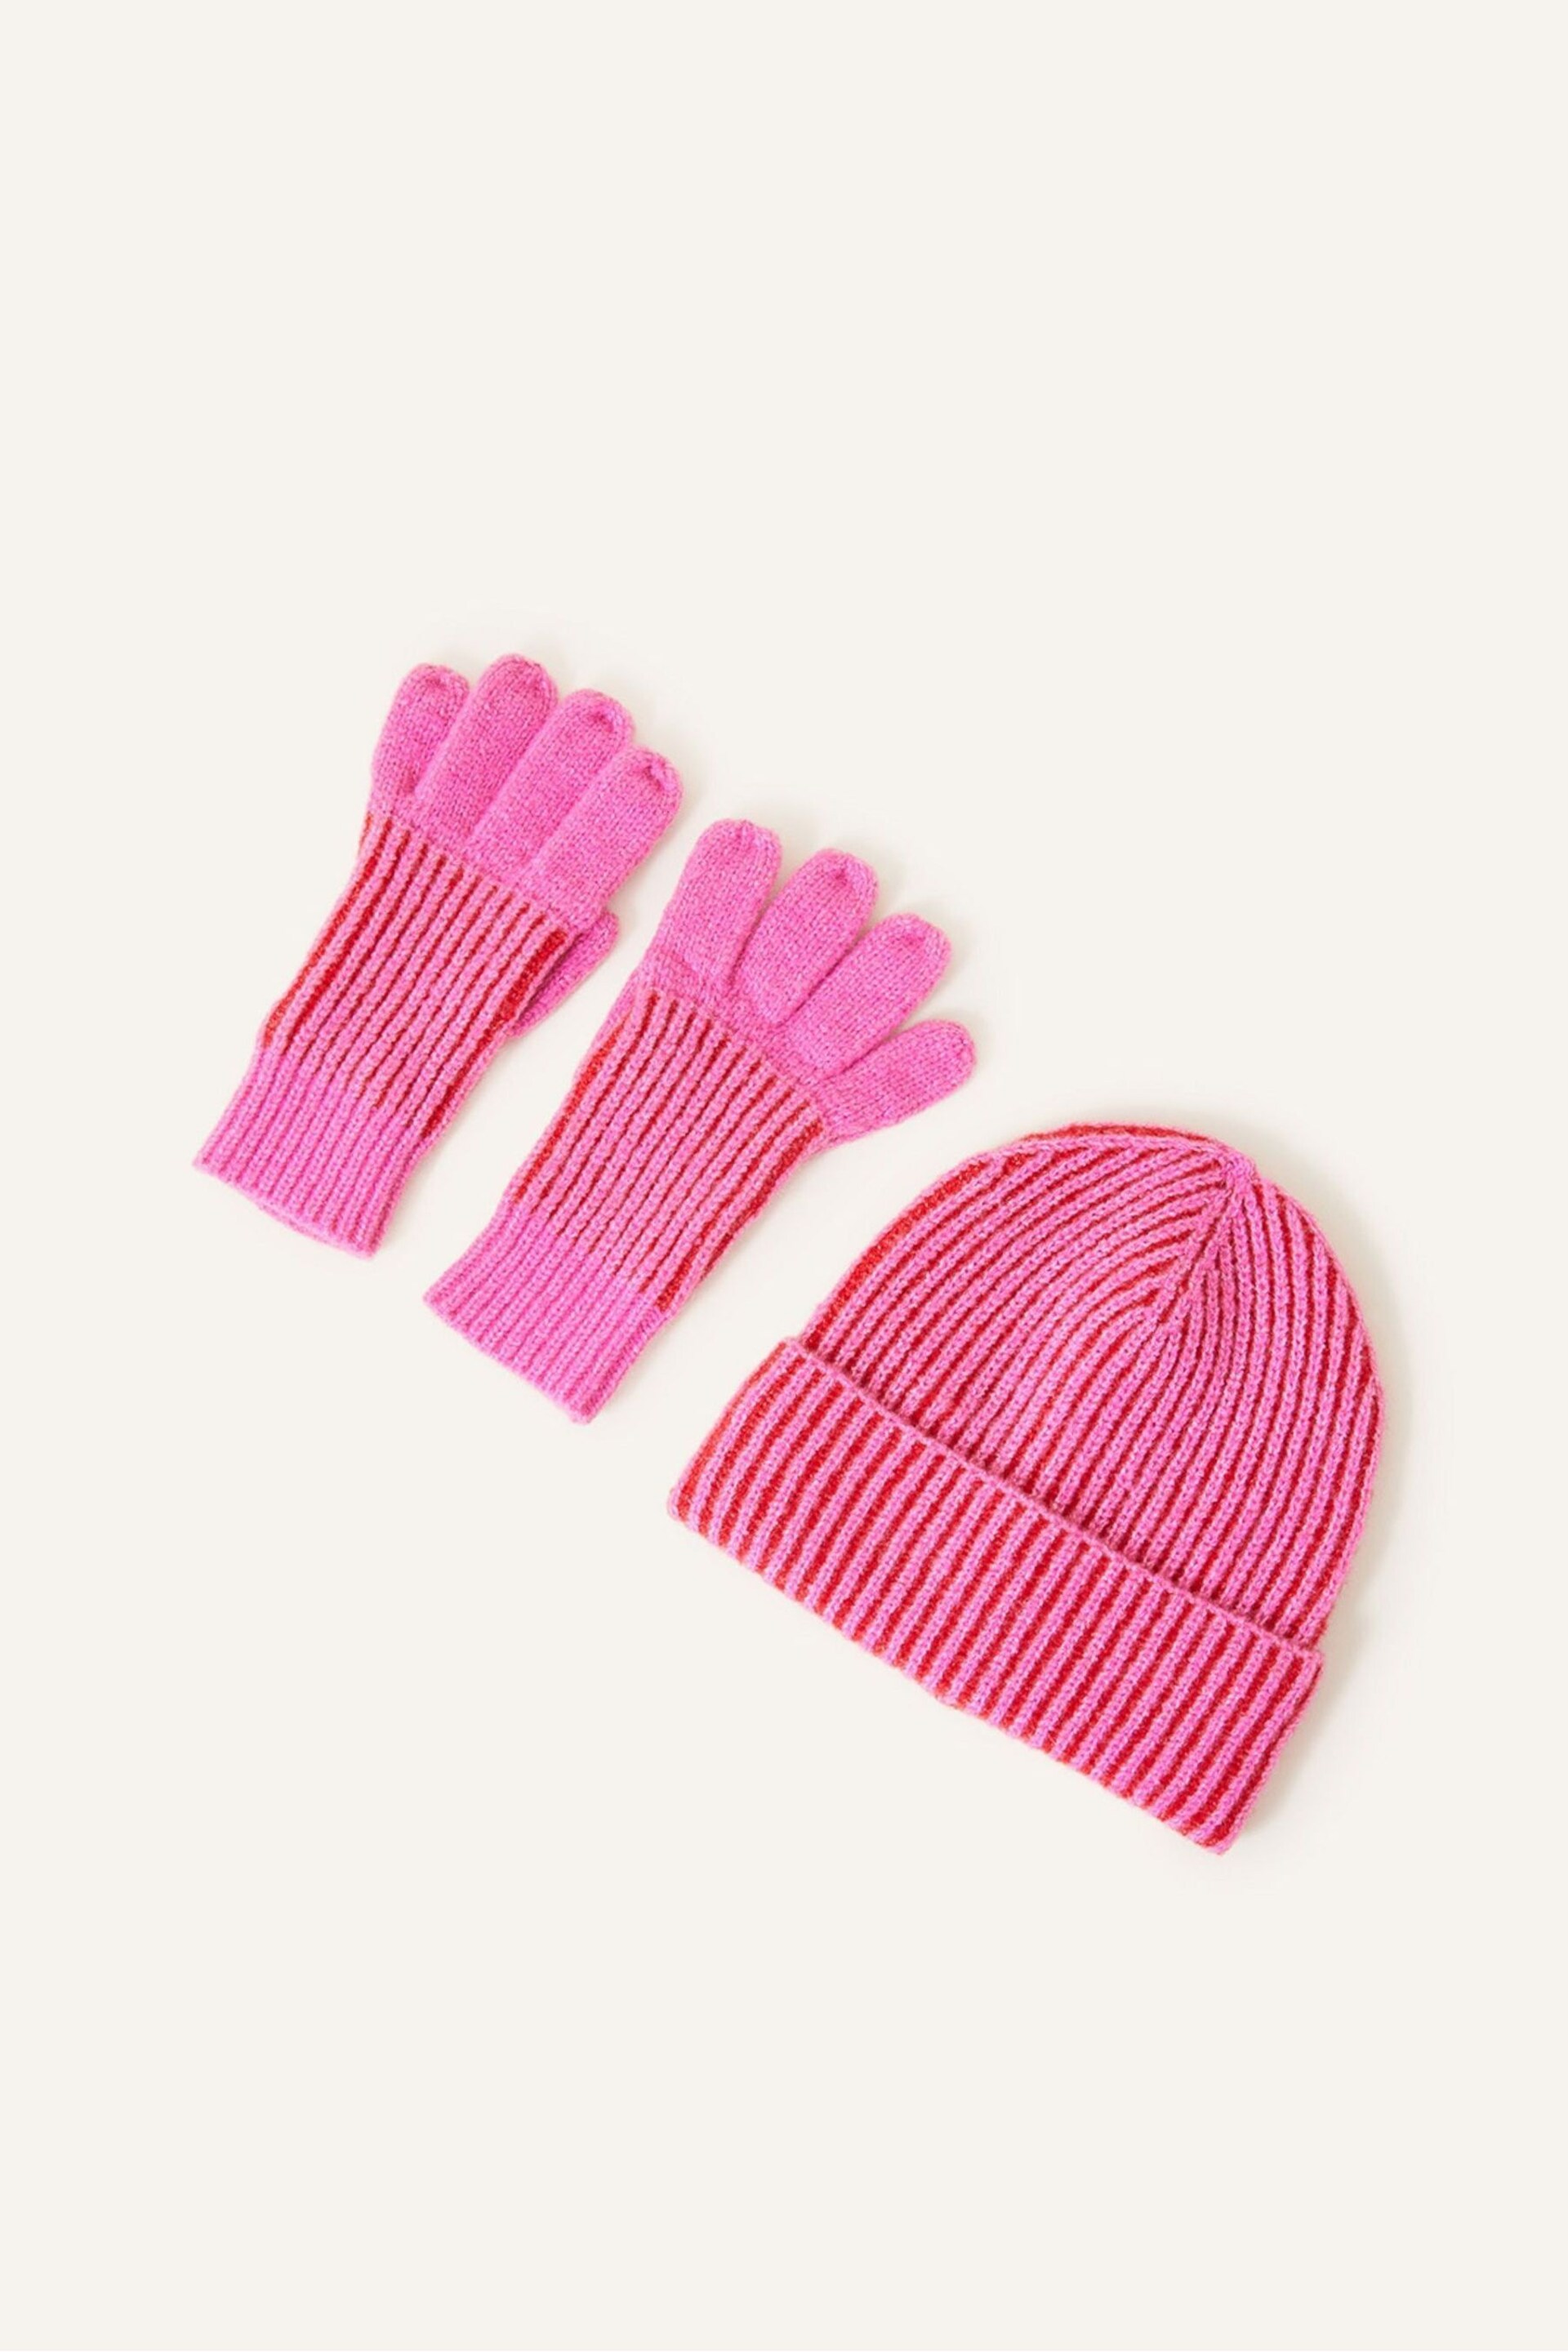 Angels By Accessorize Pink Girls Hat and Gloves Set - Image 1 of 2